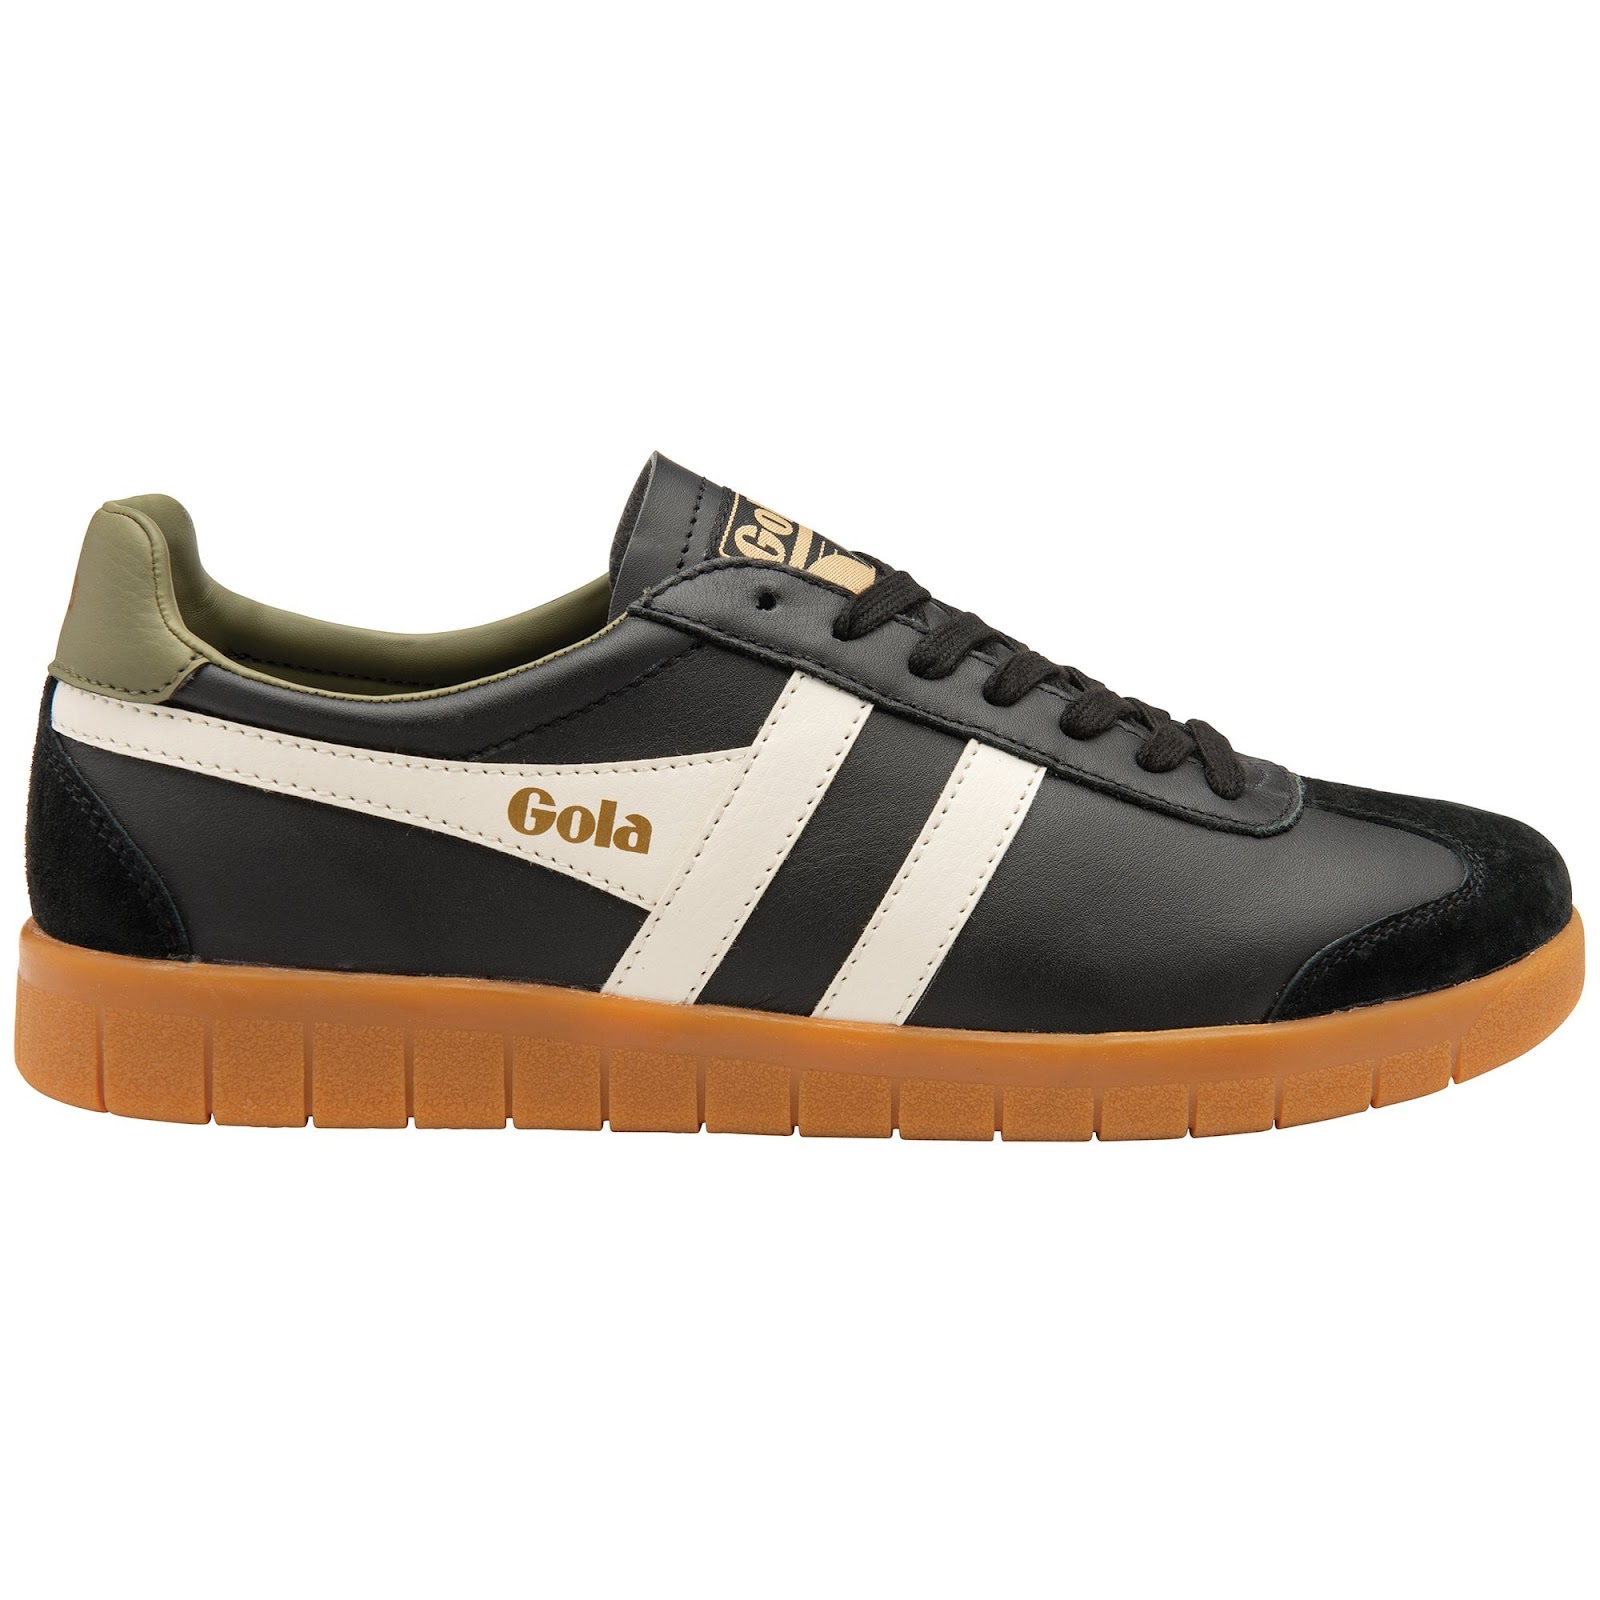 Black leather men's Gola trainers with rubber sole